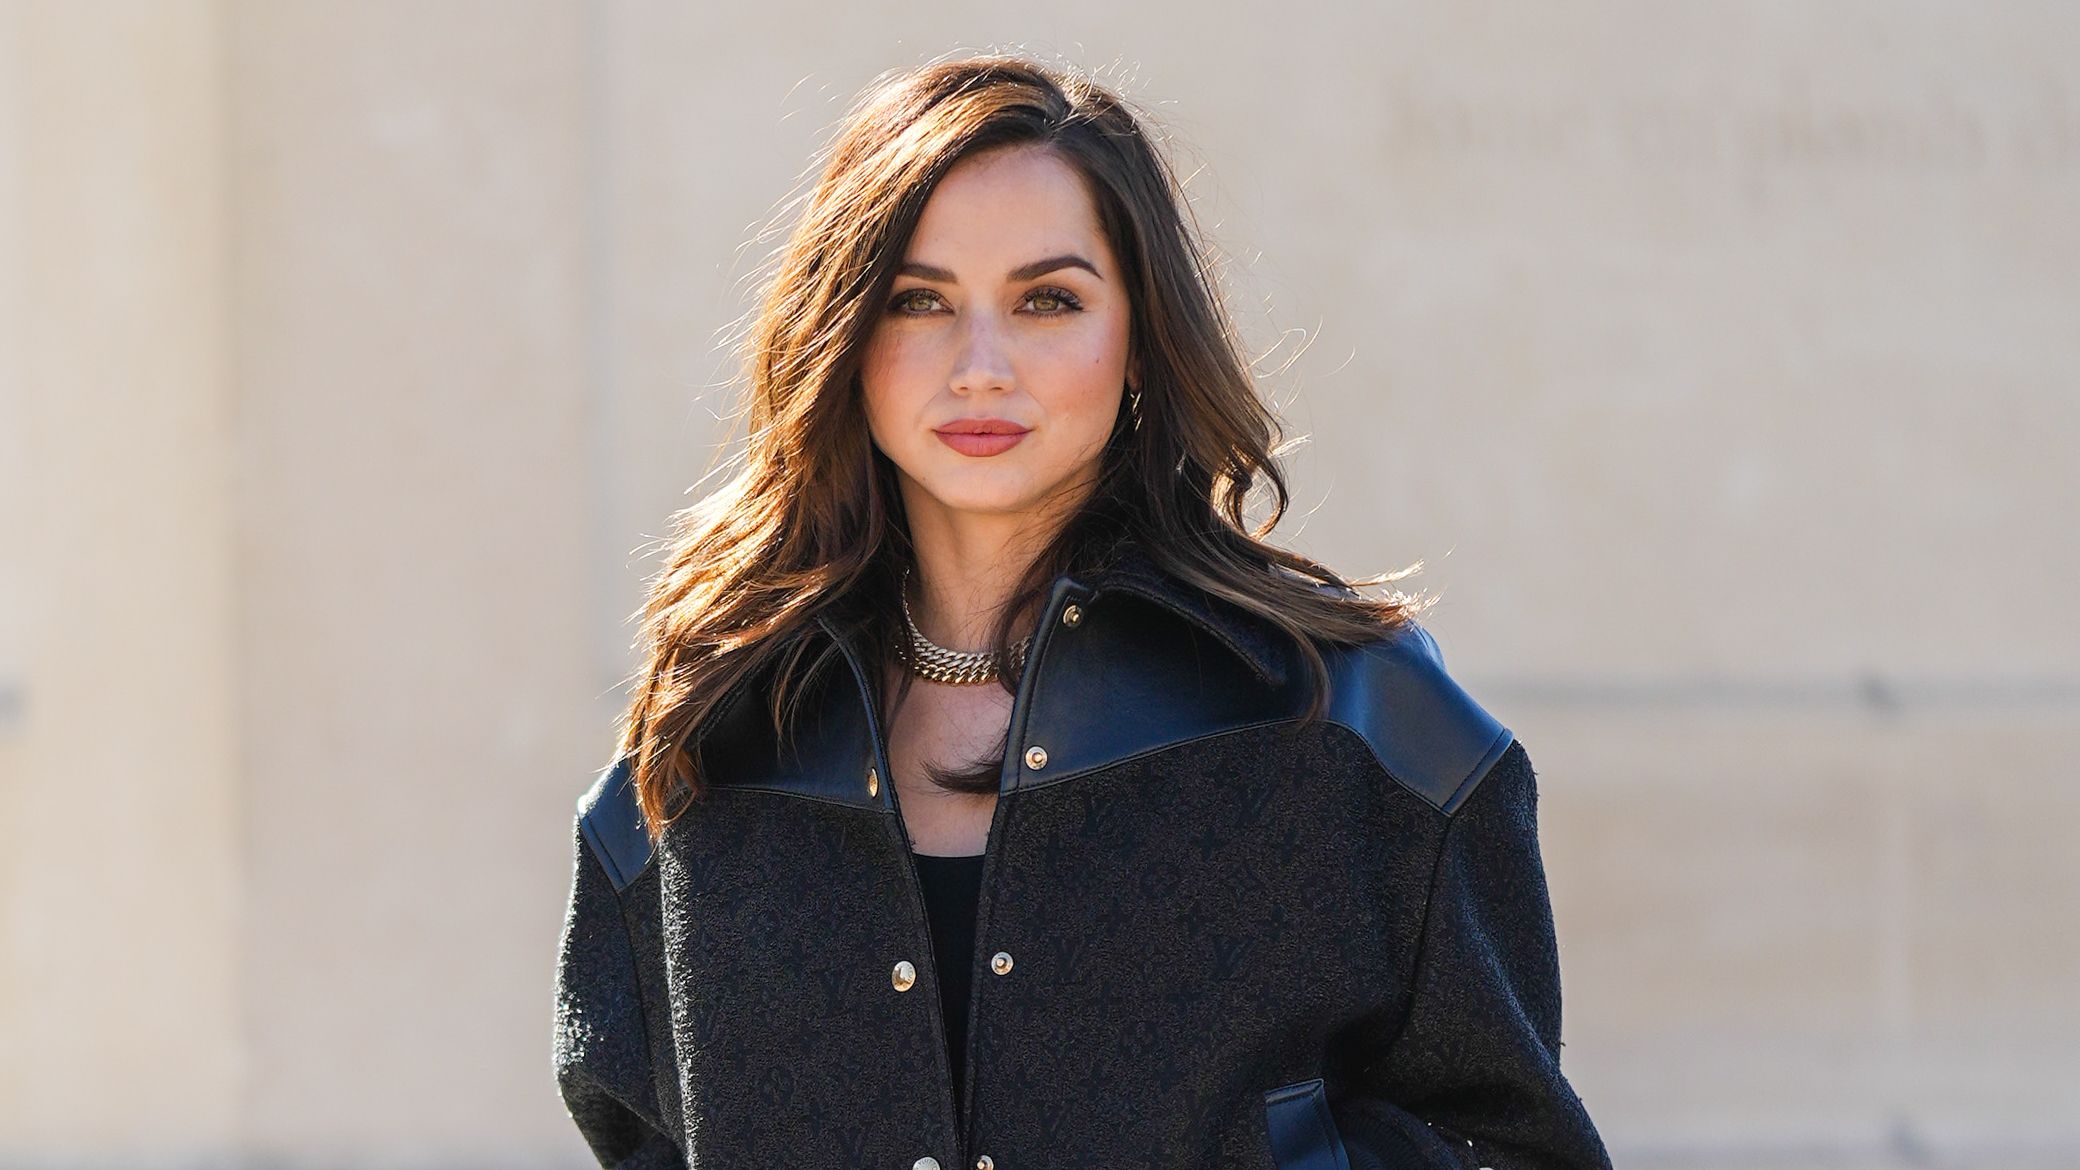 Ana de Armas on style, social media and working with Ryan Gosling